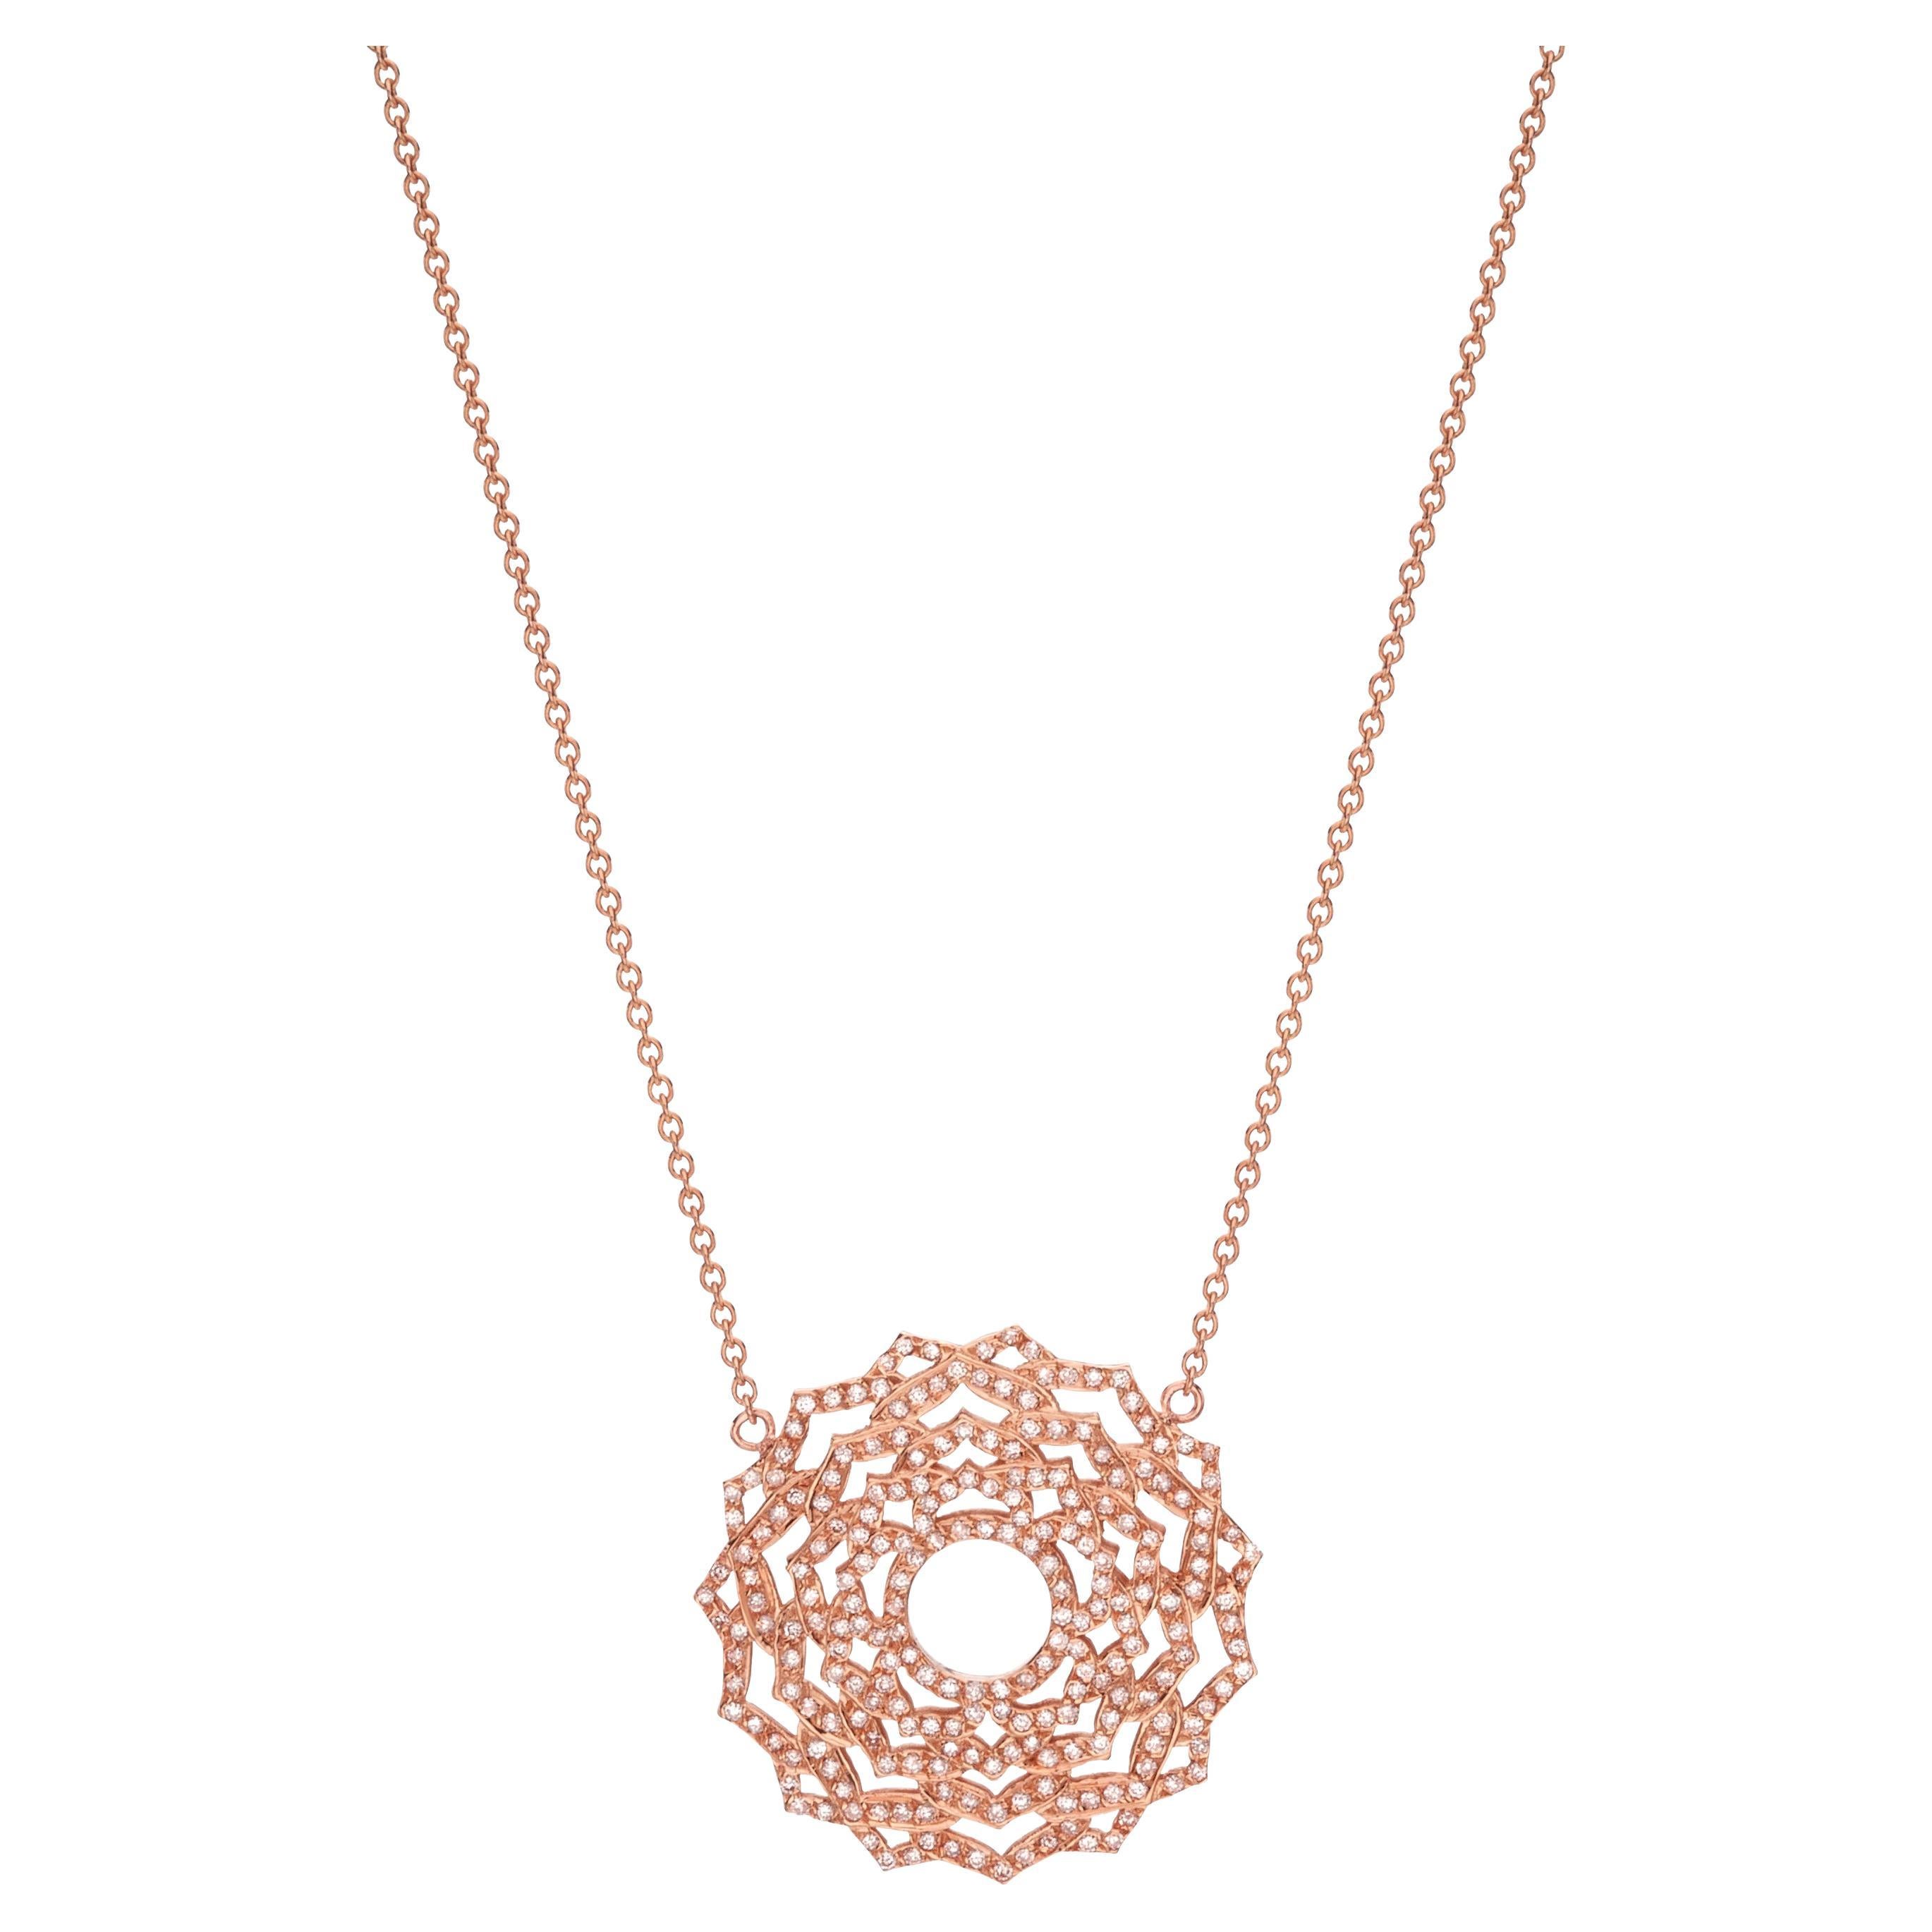 Sahasrara Crown Chakra Pendant Necklace in 18Kt Rose Gold with Diamonds For Sale